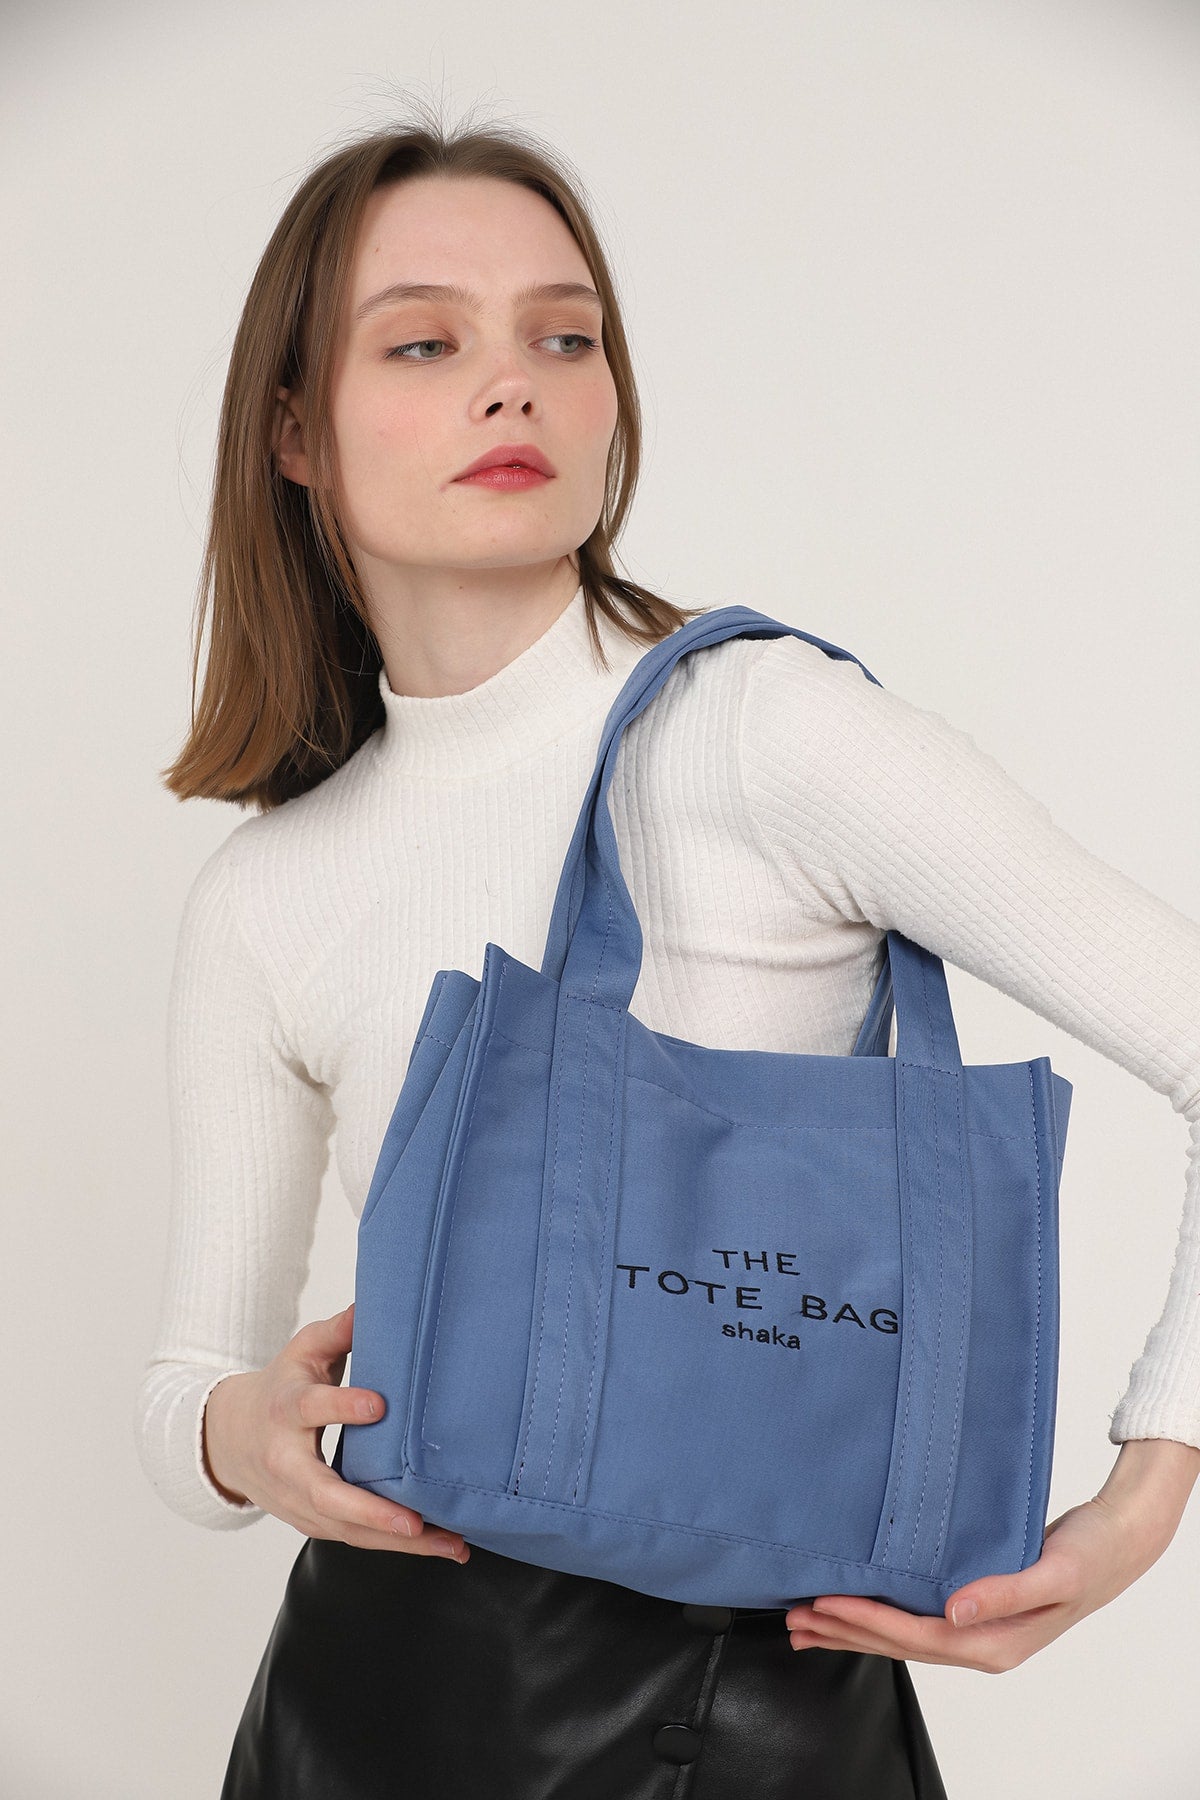 Indigo U45 Snap Closure The Tote Bag Embroidered Canvas Fabric Casual Women's Arm And Shoulder Bag 25x